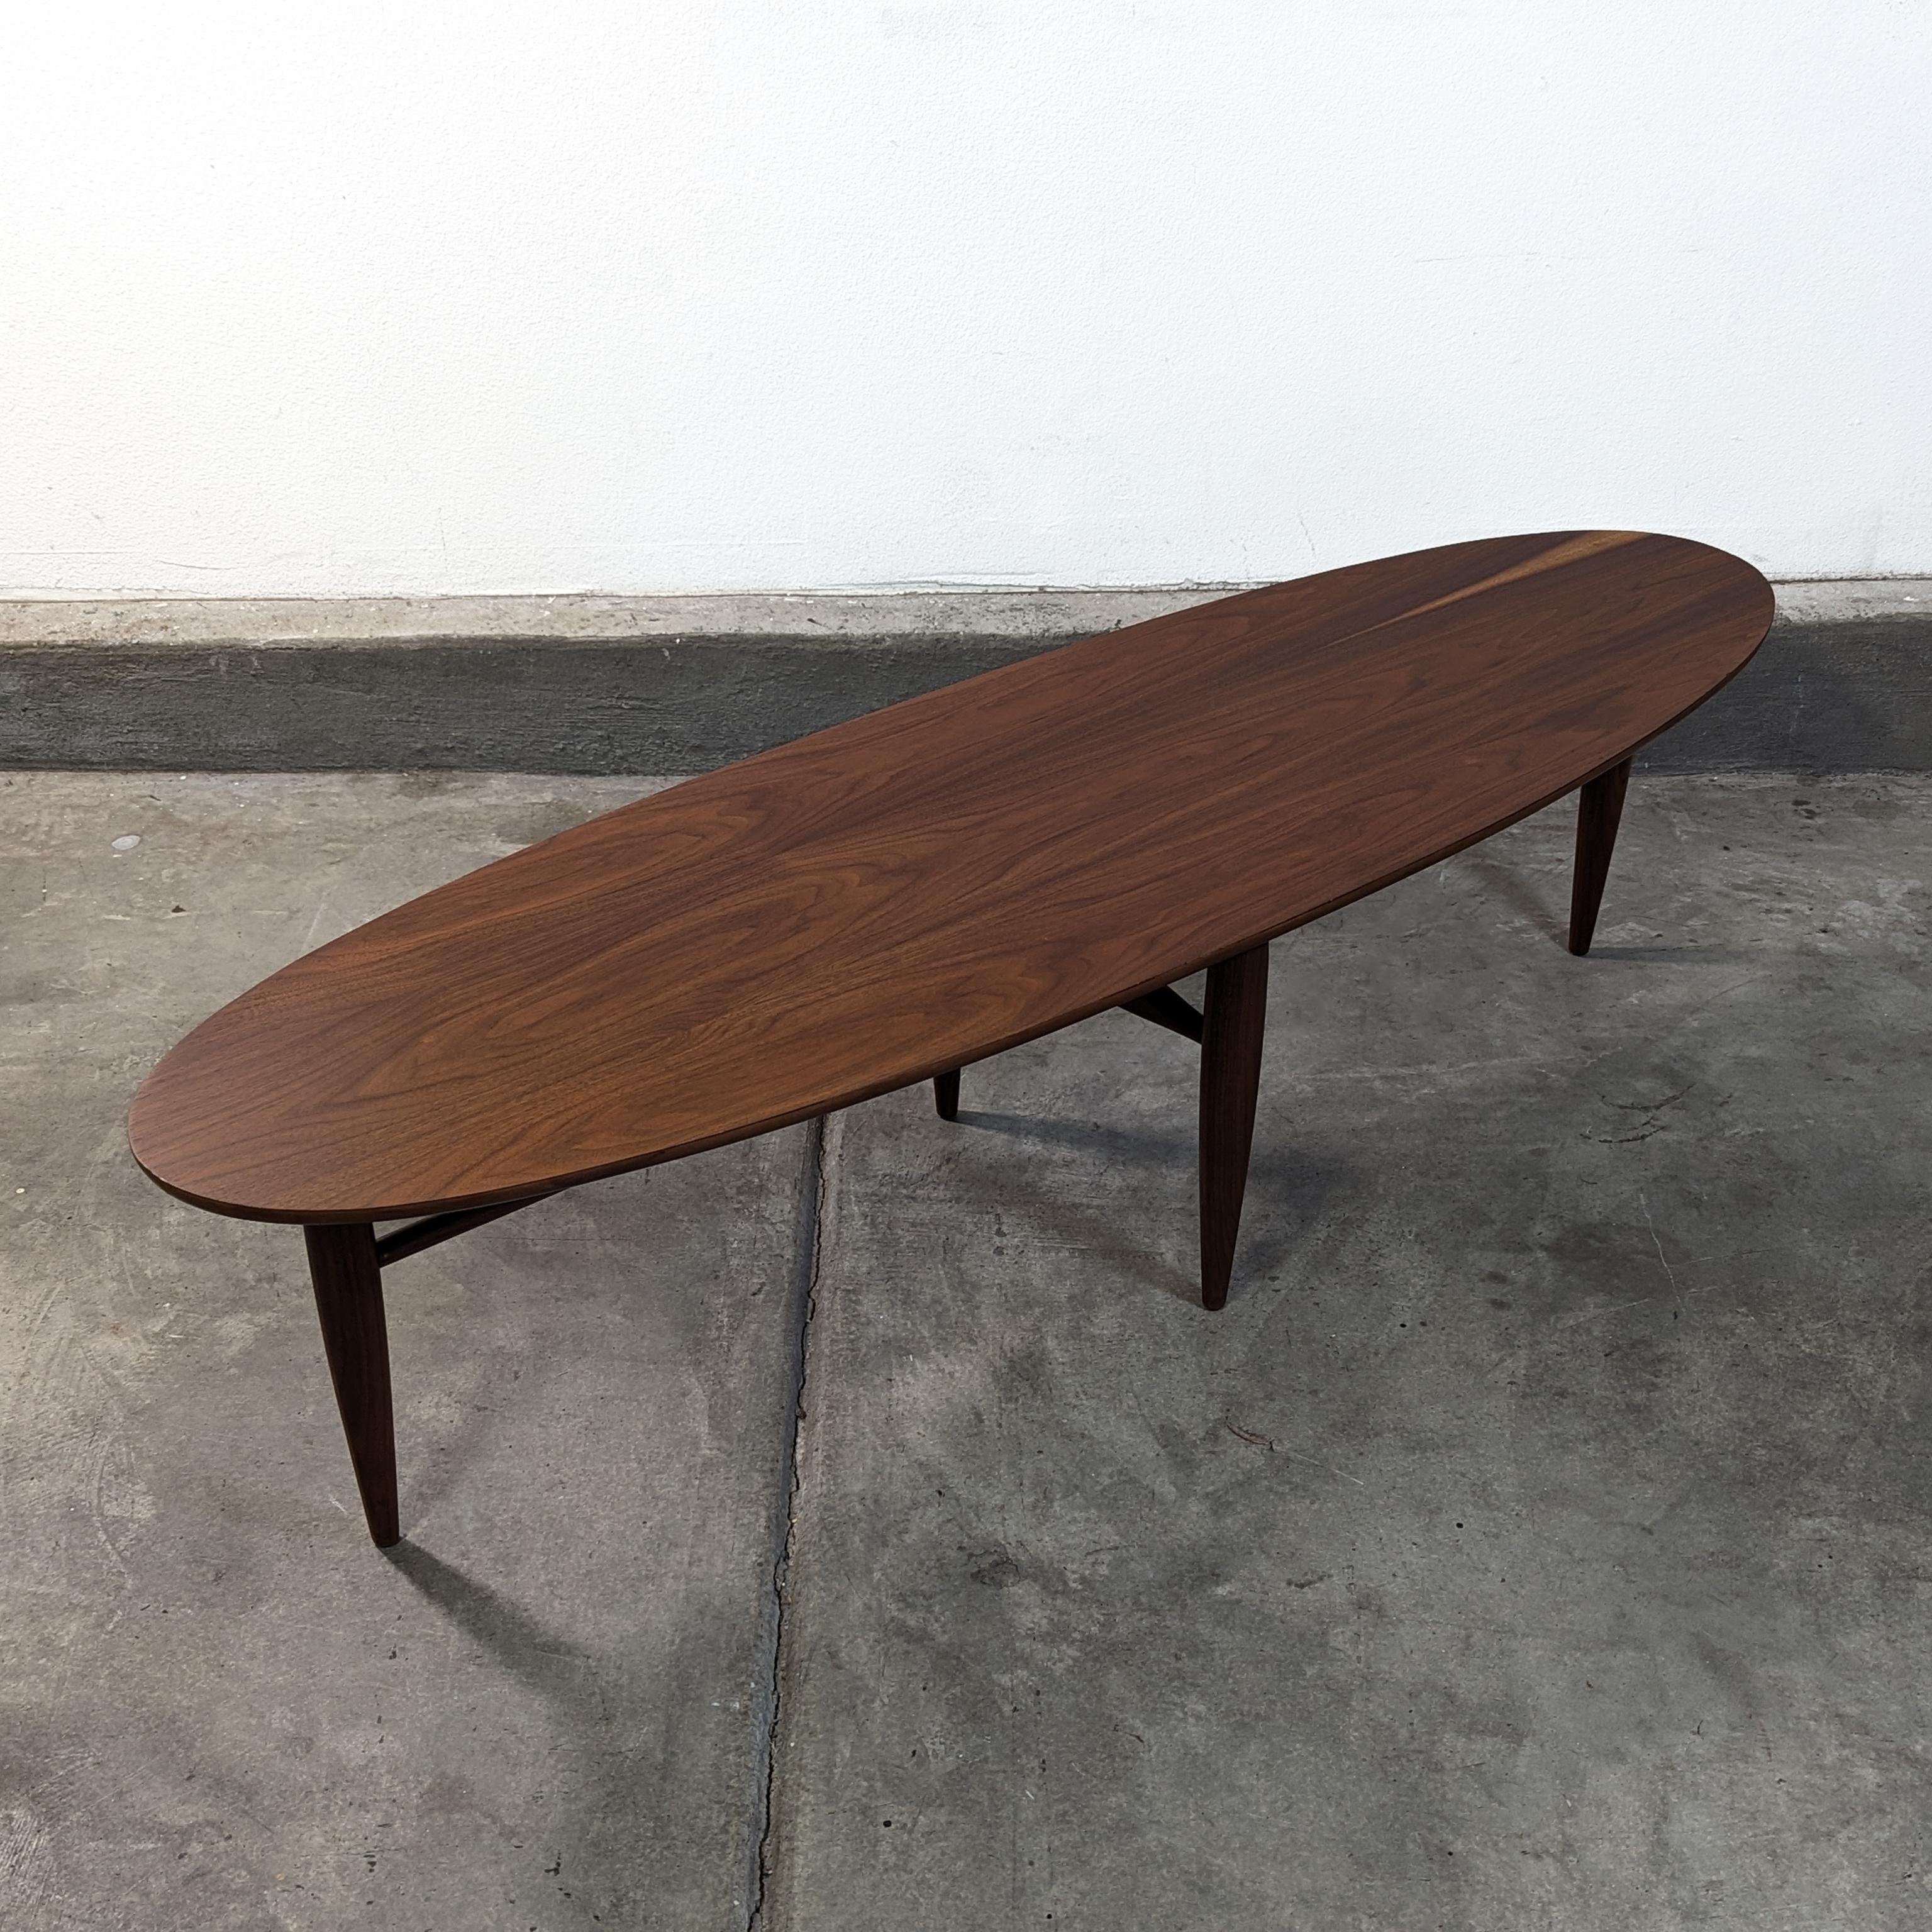 Embrace the timeless elegance of mid-century design with this exquisite vintage Surfboard Coffee Table by Mersman, circa 1960s. Meticulously refinished to showcase its sleek lines and beautiful wood grain, this piece is a stunning representation of